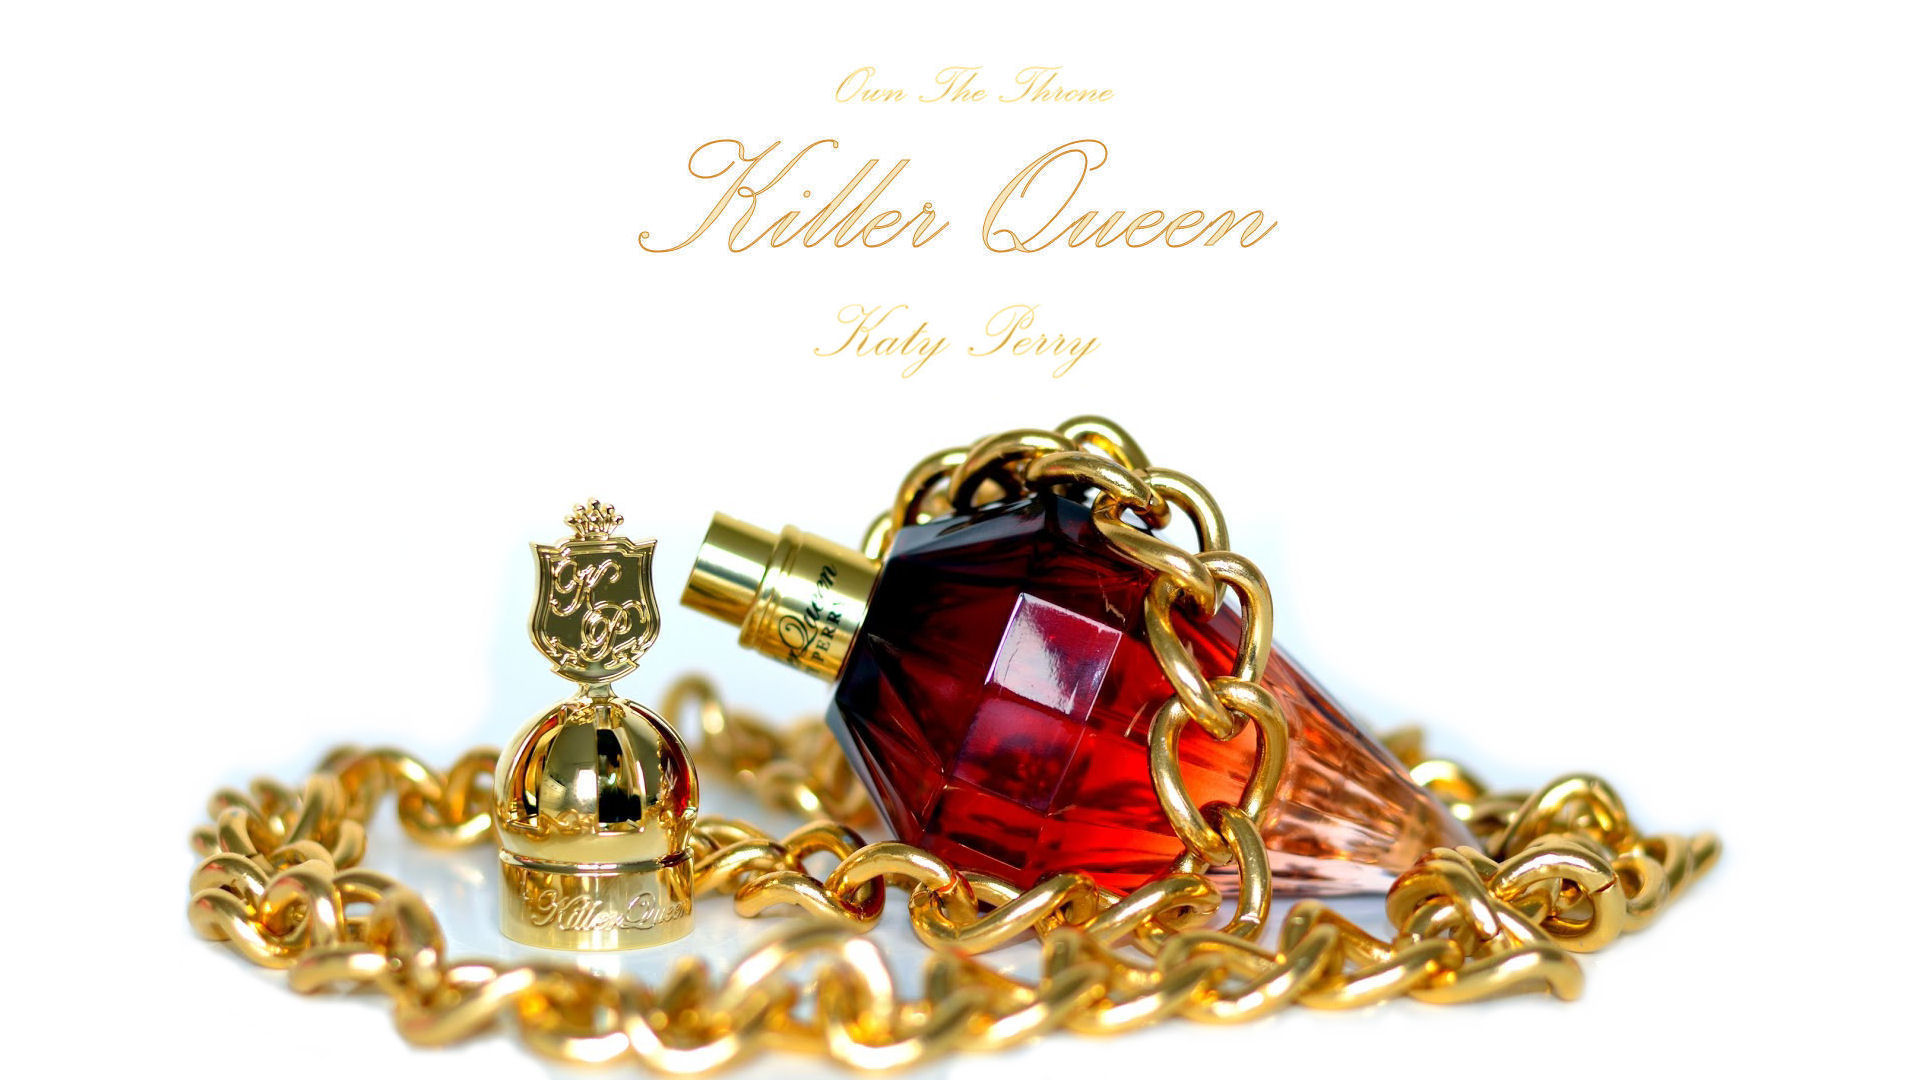 Katy Perry Killer Queen (Own The Throne) - Katy Perry Wallpaper (35689488)  - Fanpop